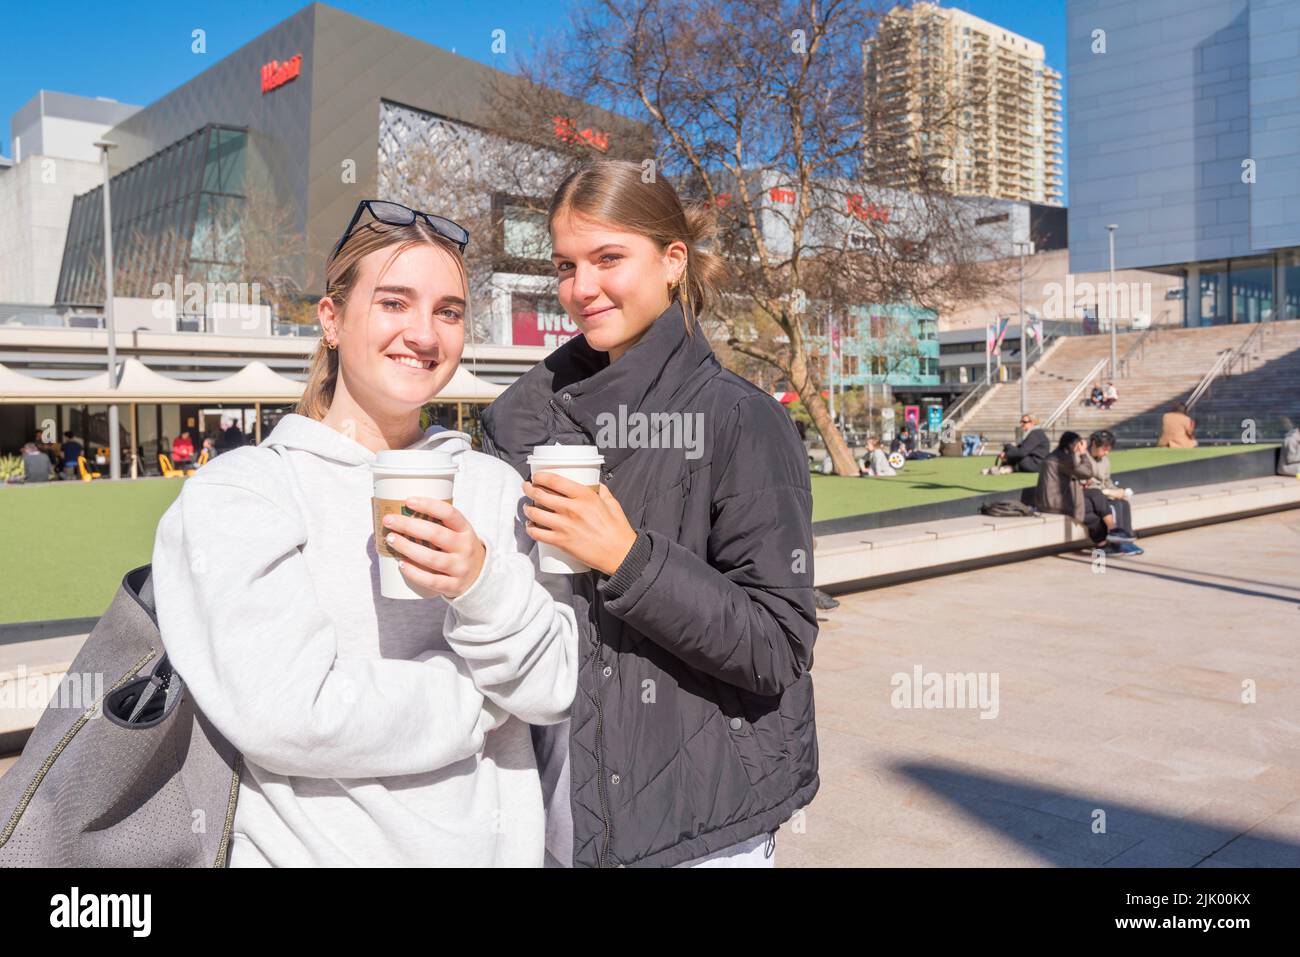 July 29, 2022 Chatswood, Sydney, Australia:  Finally some sunshine! Smiles all round from Lily and Lucy in Chatswood, Sydney as they enjoy their coffee and the morning sun. After what seems like weeks of flooding rain and constant downpours, sunny weather is predicted for Sydney over the coming weekend. Photo credit Stephen Dwyer Alamy Live News Stock Photo